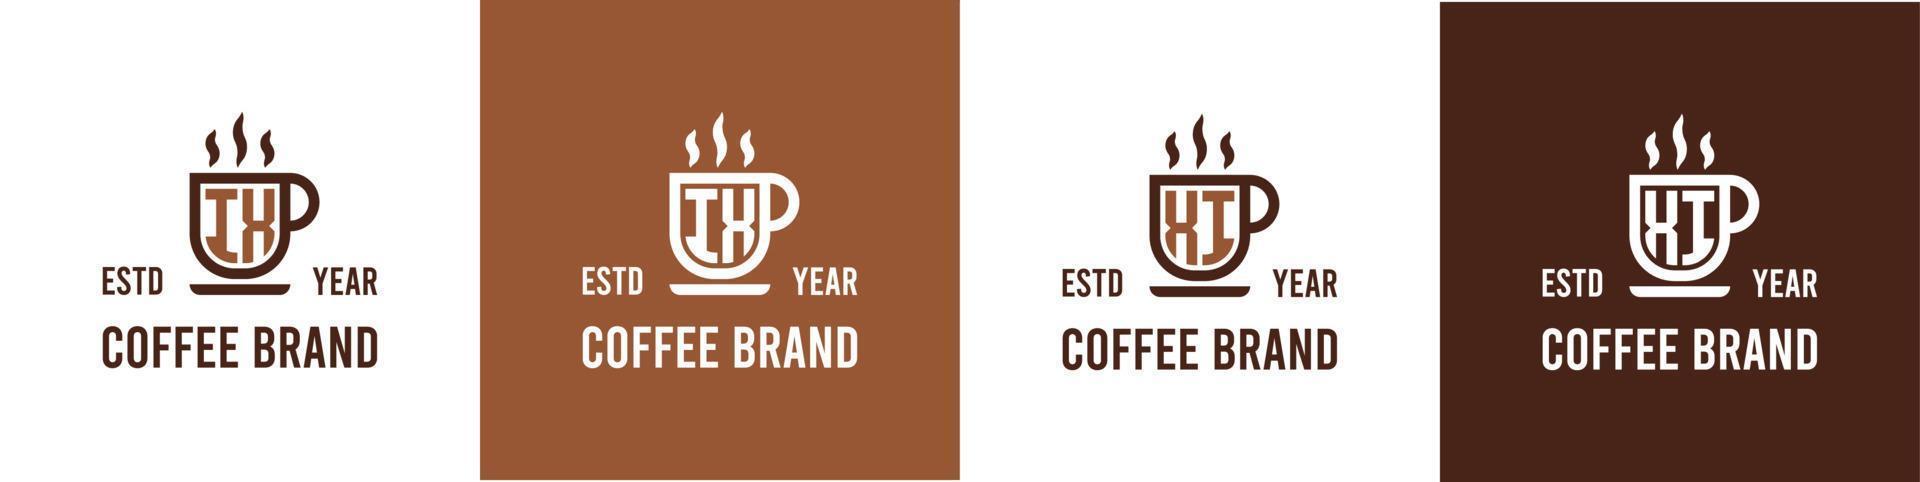 Letter IX and XI Coffee Logo, suitable for any business related to Coffee, Tea, or Other with IX or XI initials. vector